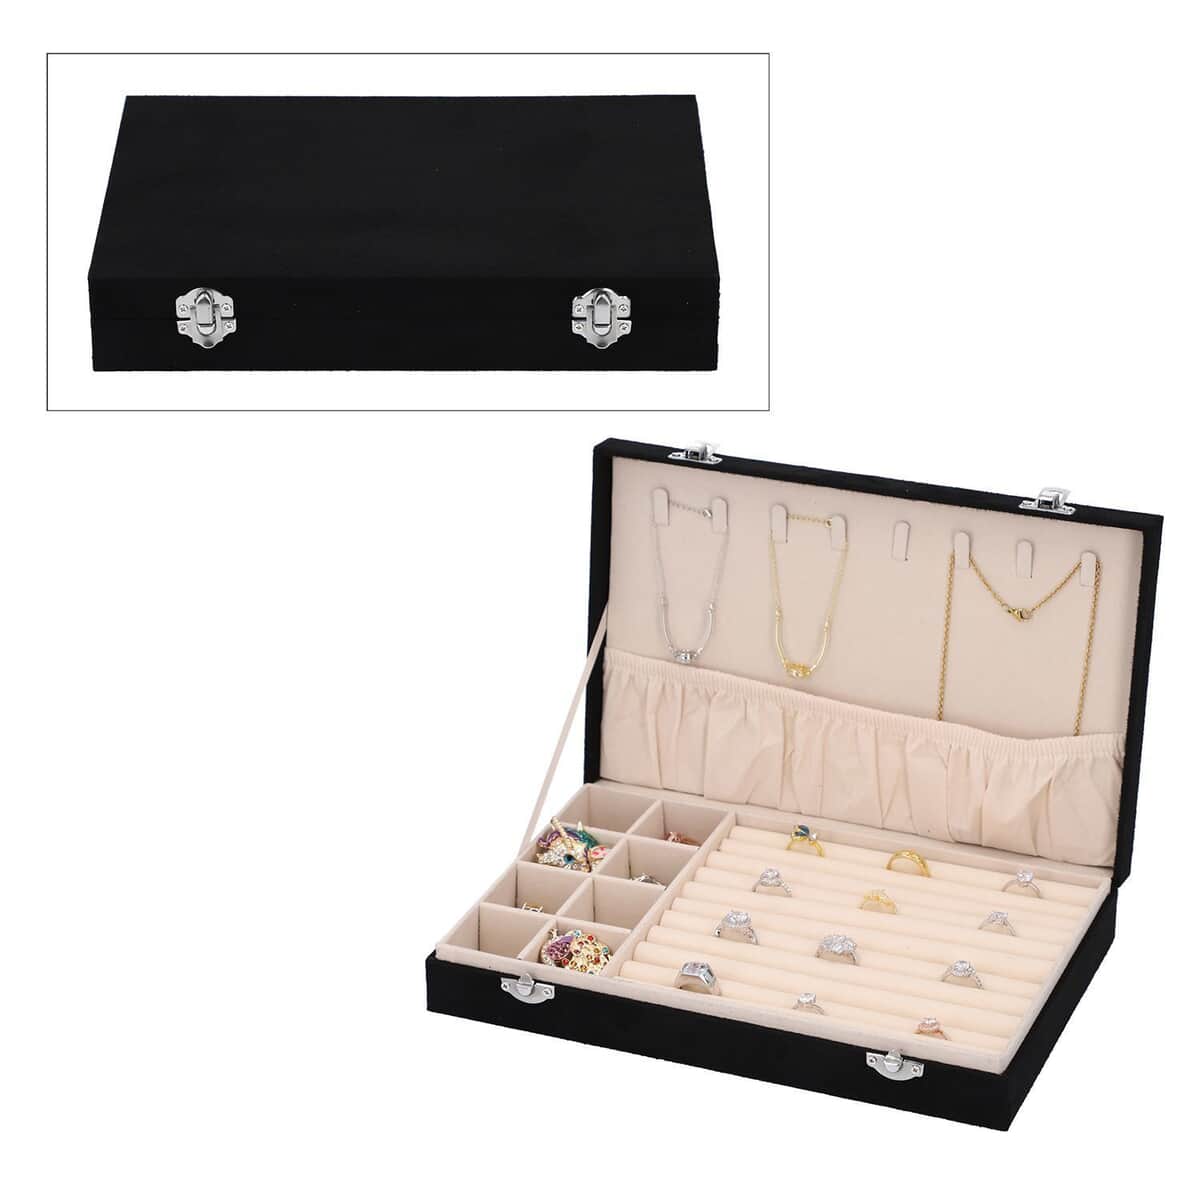 Black Velvet Jewelry Box with Anti Tarnish Lining & Lock, Anti Tarnish Jewelry Case, Jewelry Organizer, Jewelry Storage Box (8 Necklace Hooks, 8 Earrings/Pendant Sections and 10 Rings Slots) image number 0